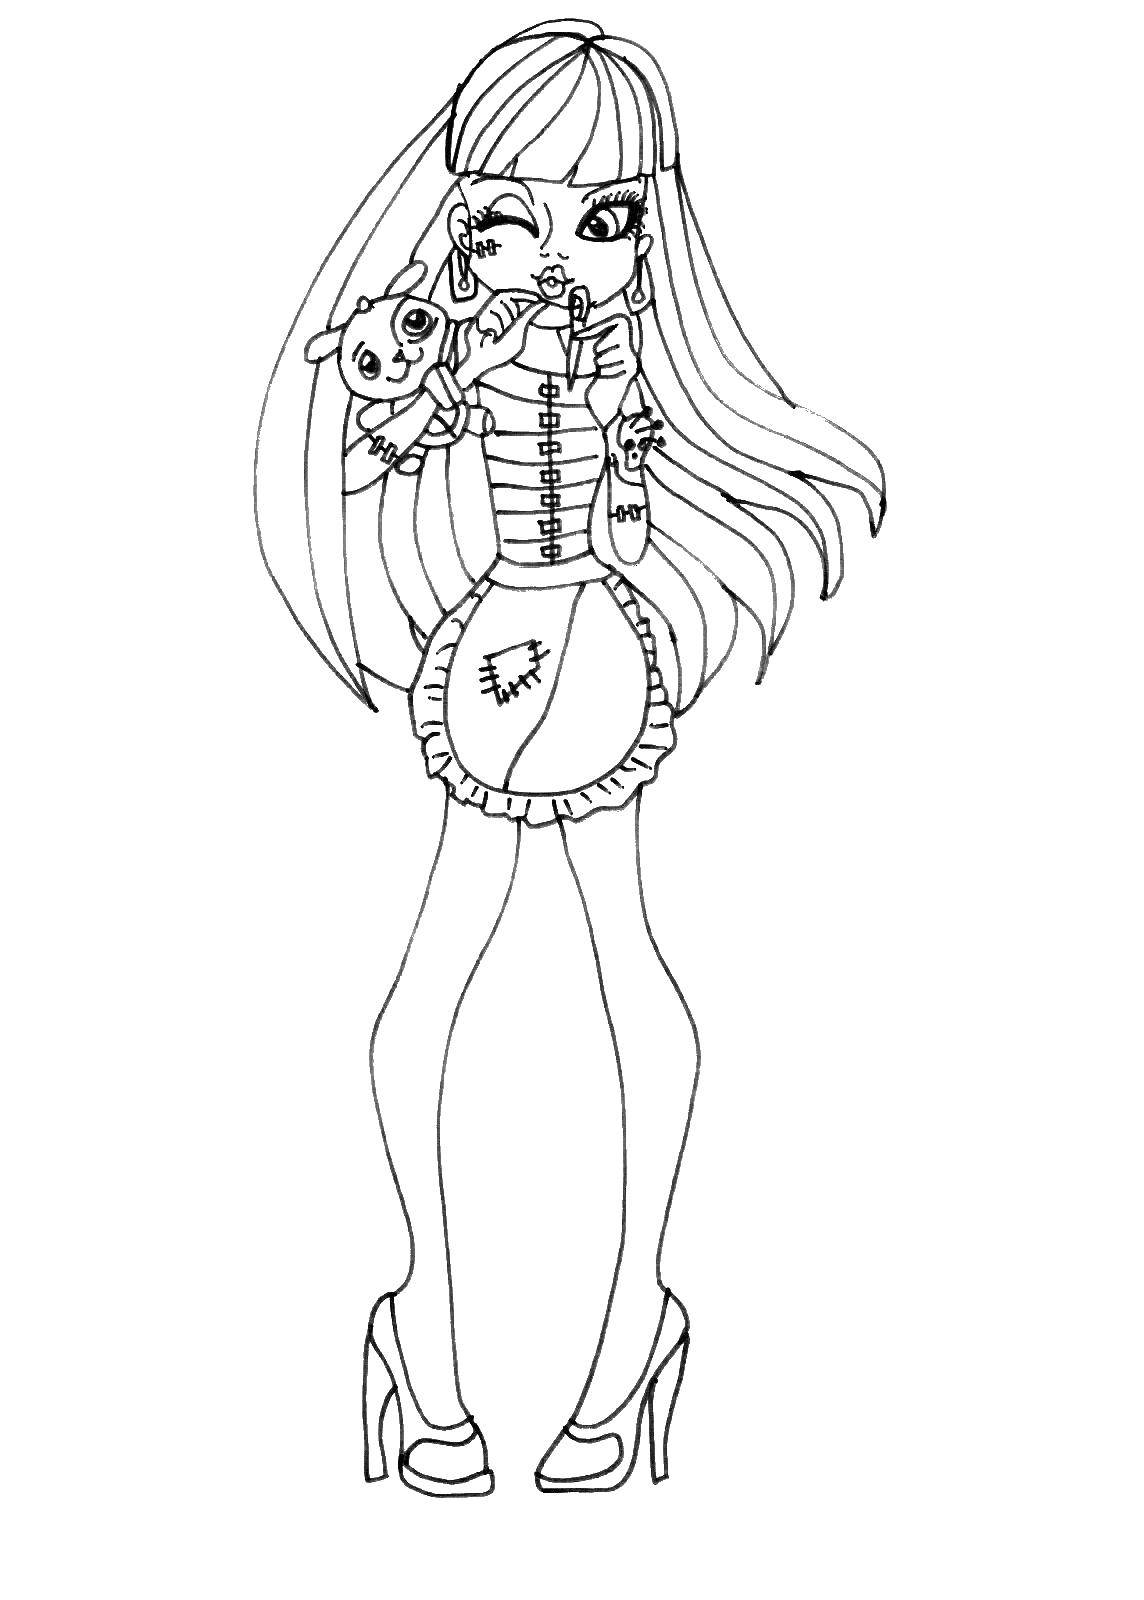 Coloring Girl with toy. Category monster high. Tags:  Monster High.